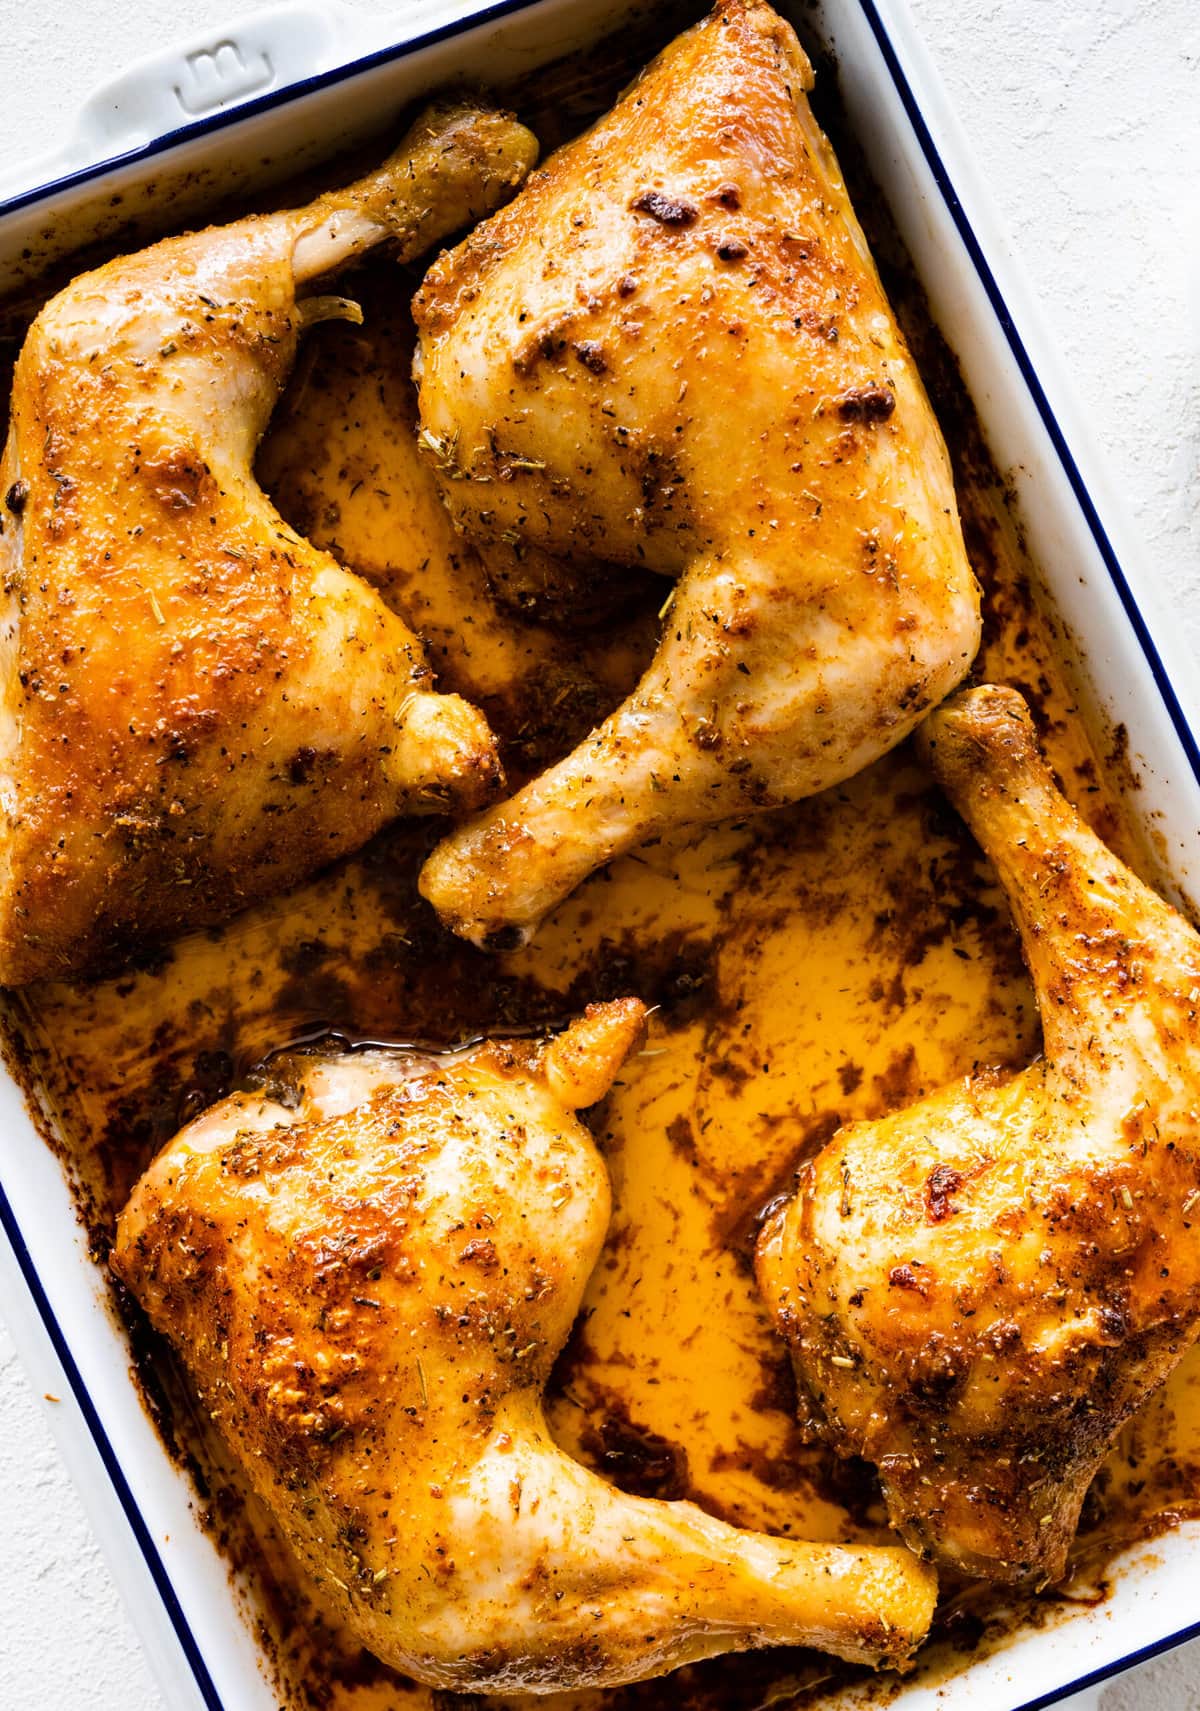 How to make easy baked chicken leg quarters step-by-step instructions: baking the chicken.